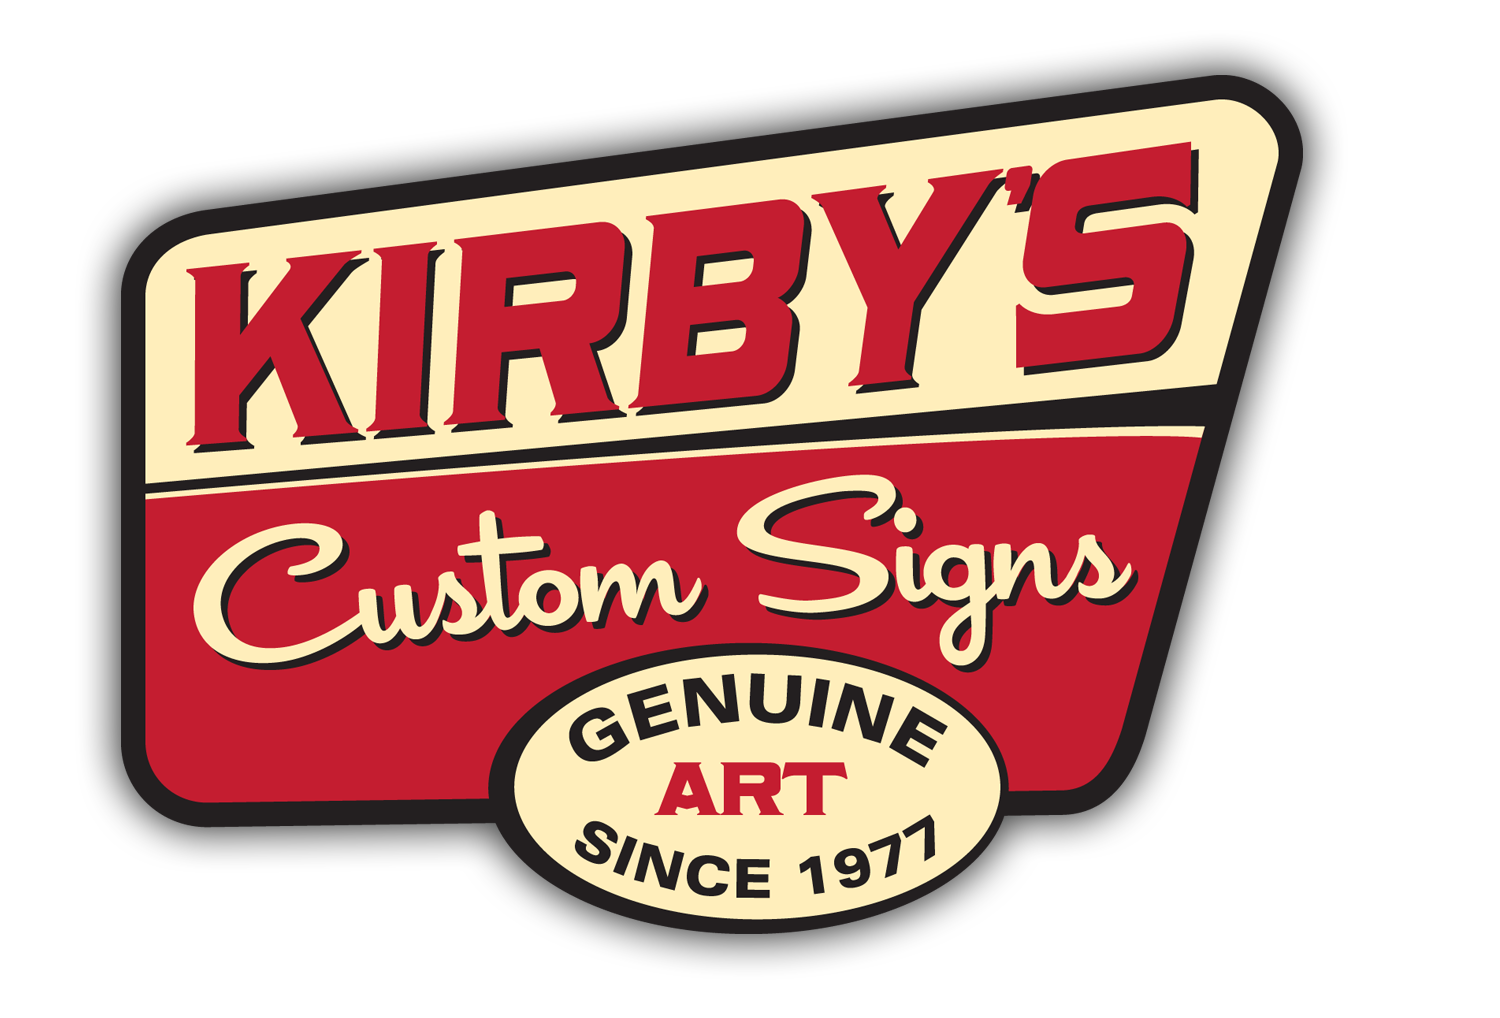 Kirby's Signs